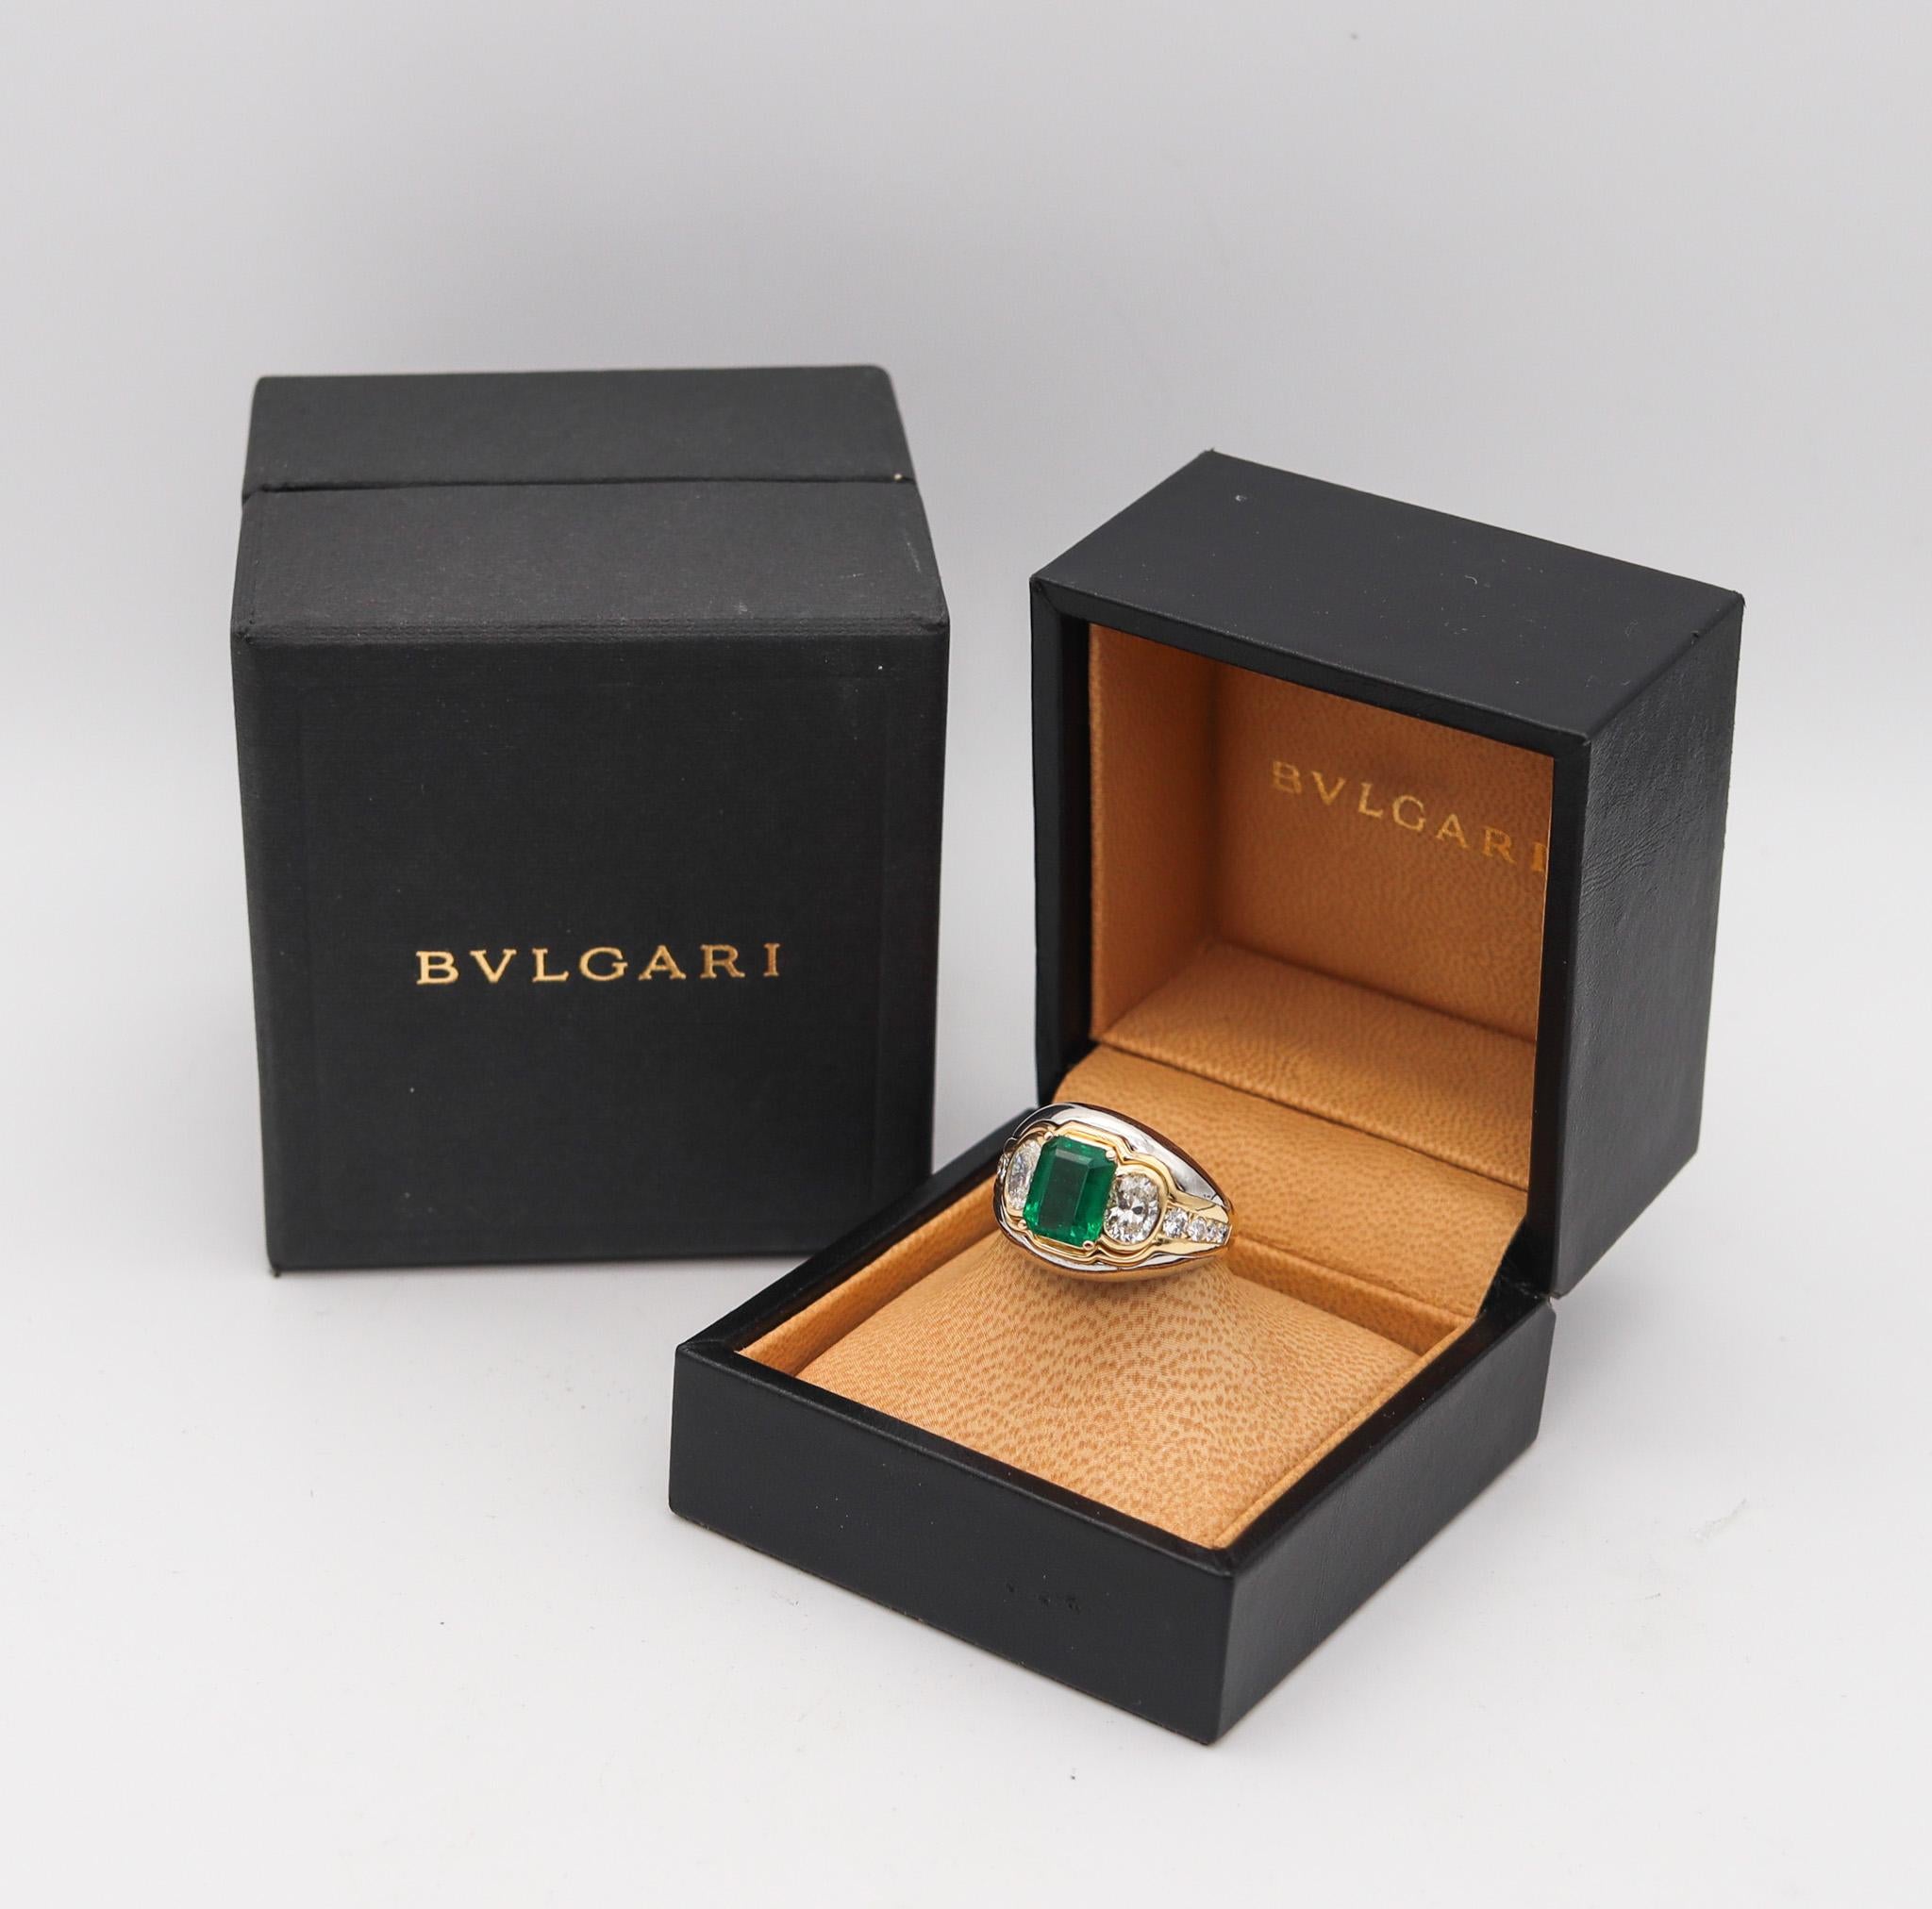 Emerald cocktail ring designed by Bvlgari.

An exceptional piece of jewelry, created in Rome Italy by the iconic jewelry house of Bvlgari. This rare cocktail ring is part of the Bvlgari Prestige Collection and was carefully crafted with great